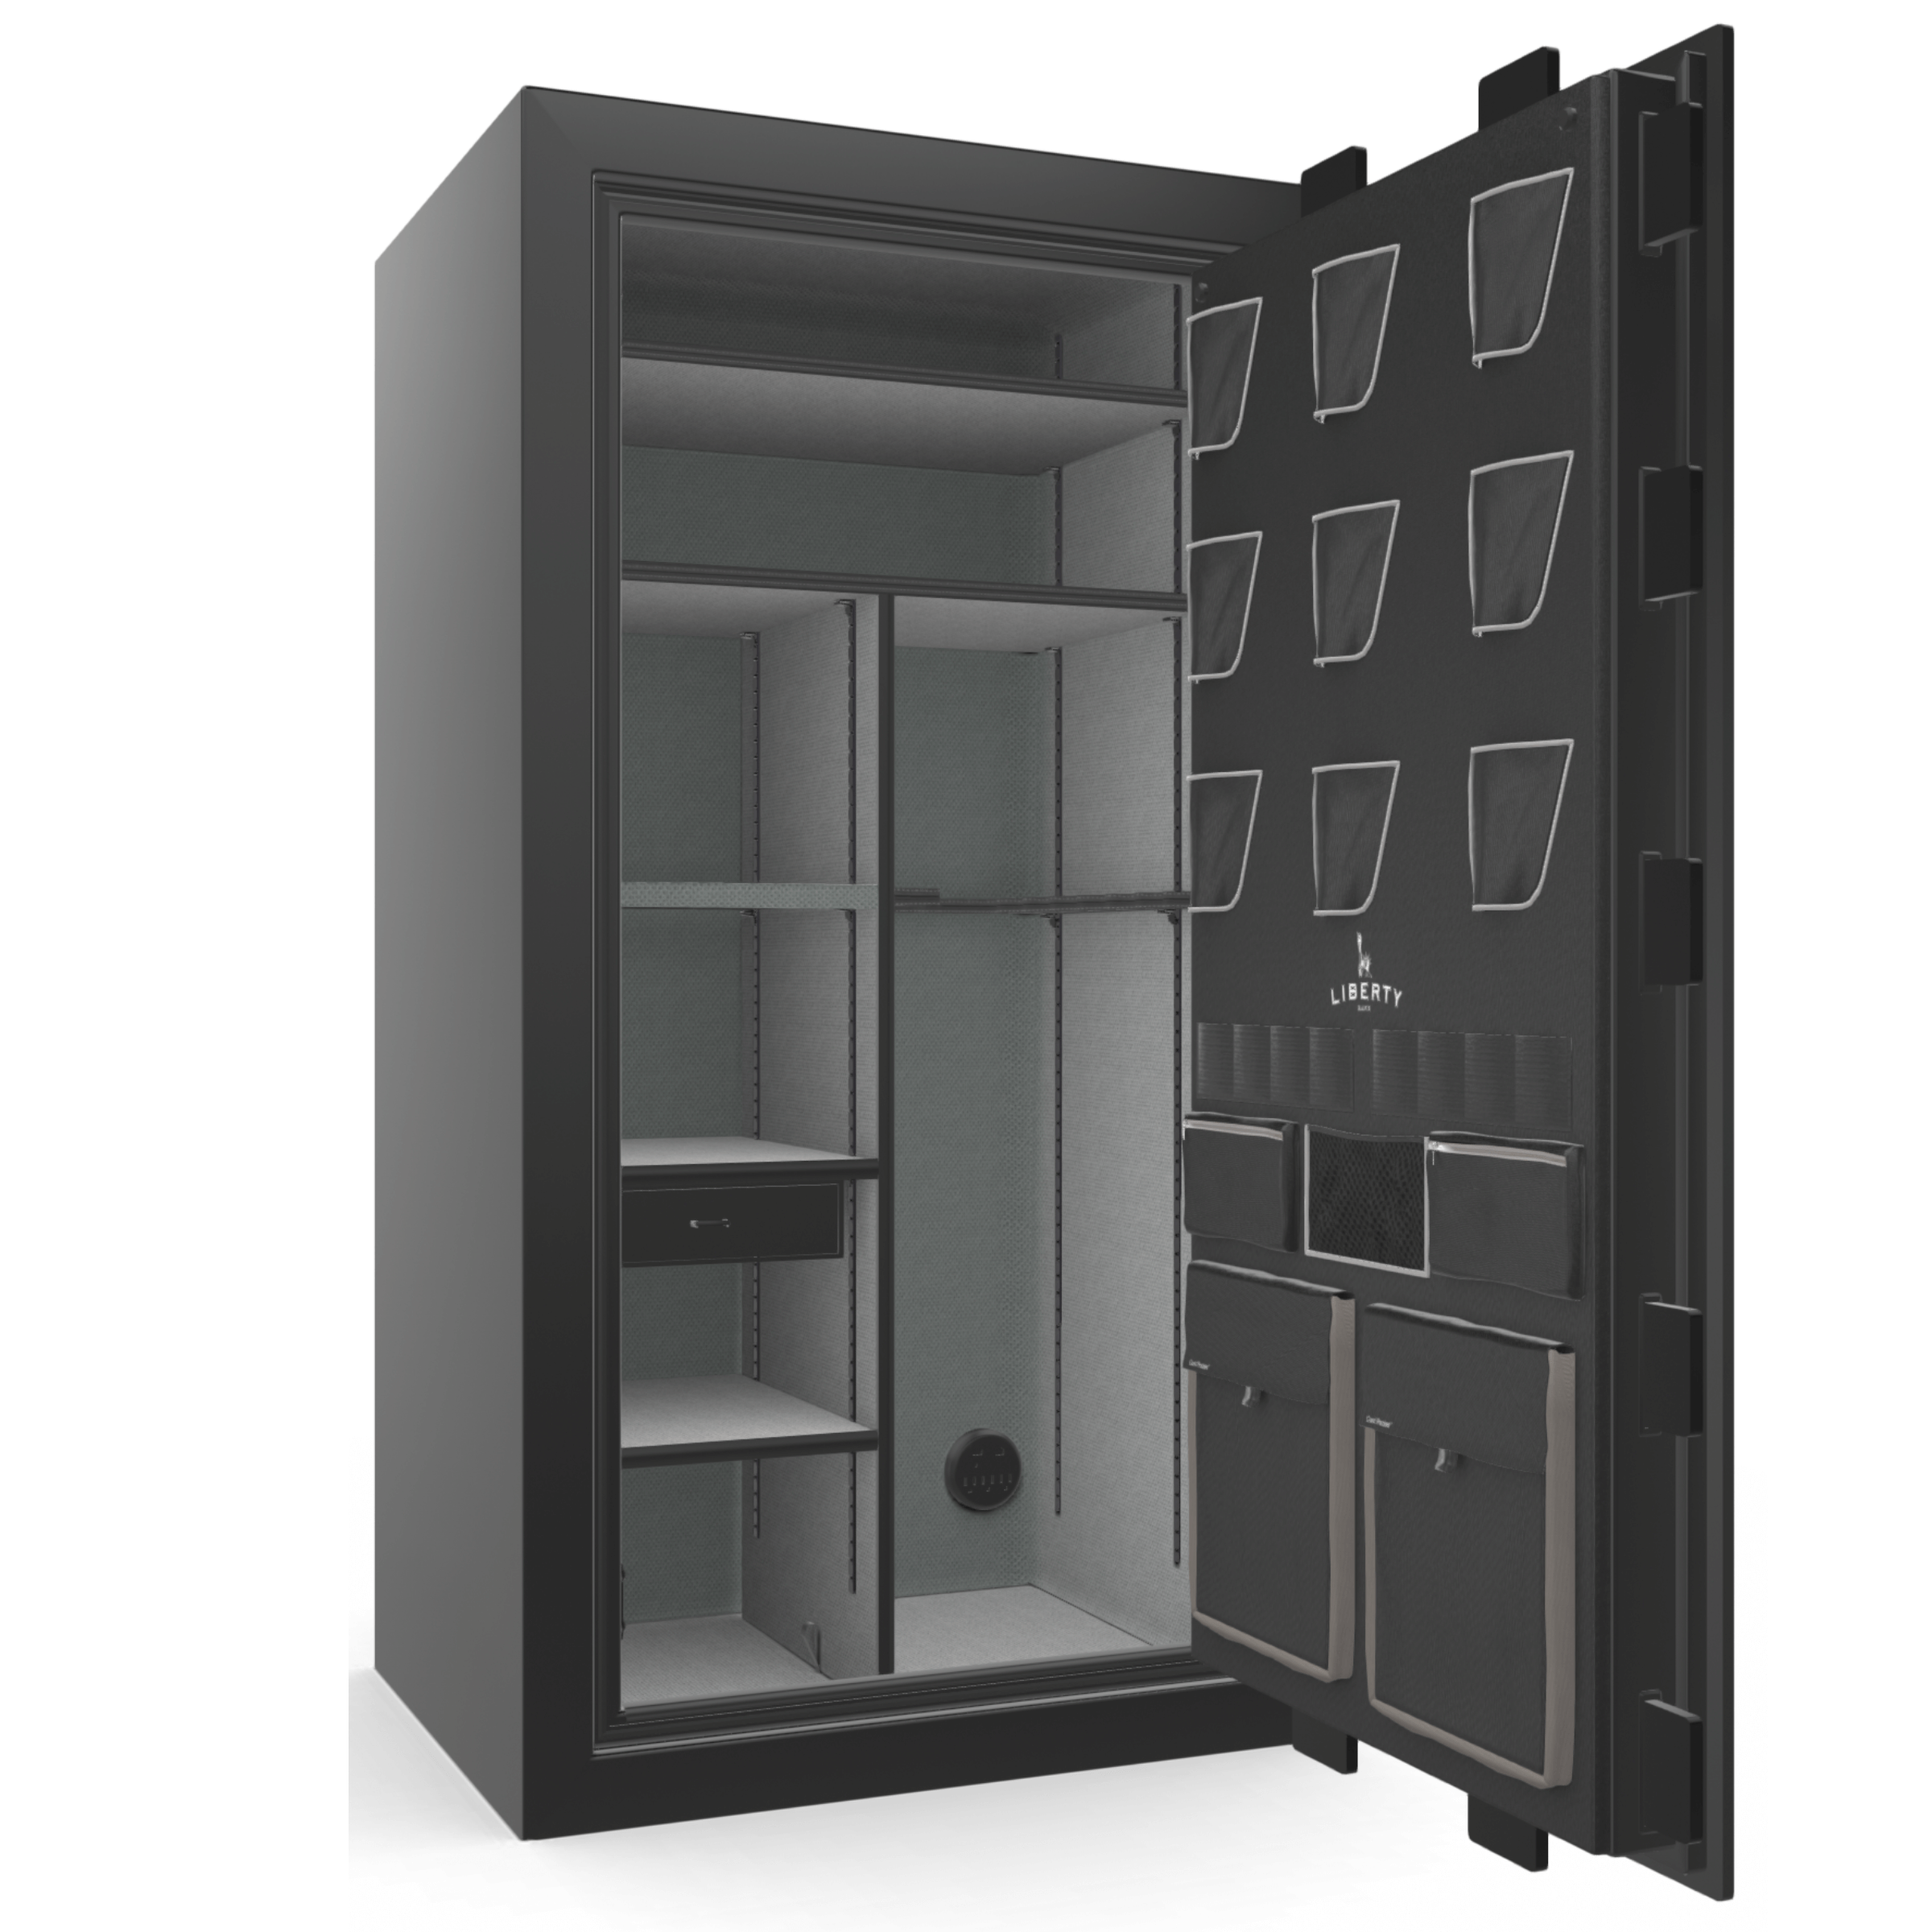 Classic Plus Series | Level 7 Security | 110 Minute Fire Protection | 50 | DIMENSIONS: 72.5"(H) X 42"(W) X 32"(D) | Gray 2 Tone | Electronic Lock, photo 38